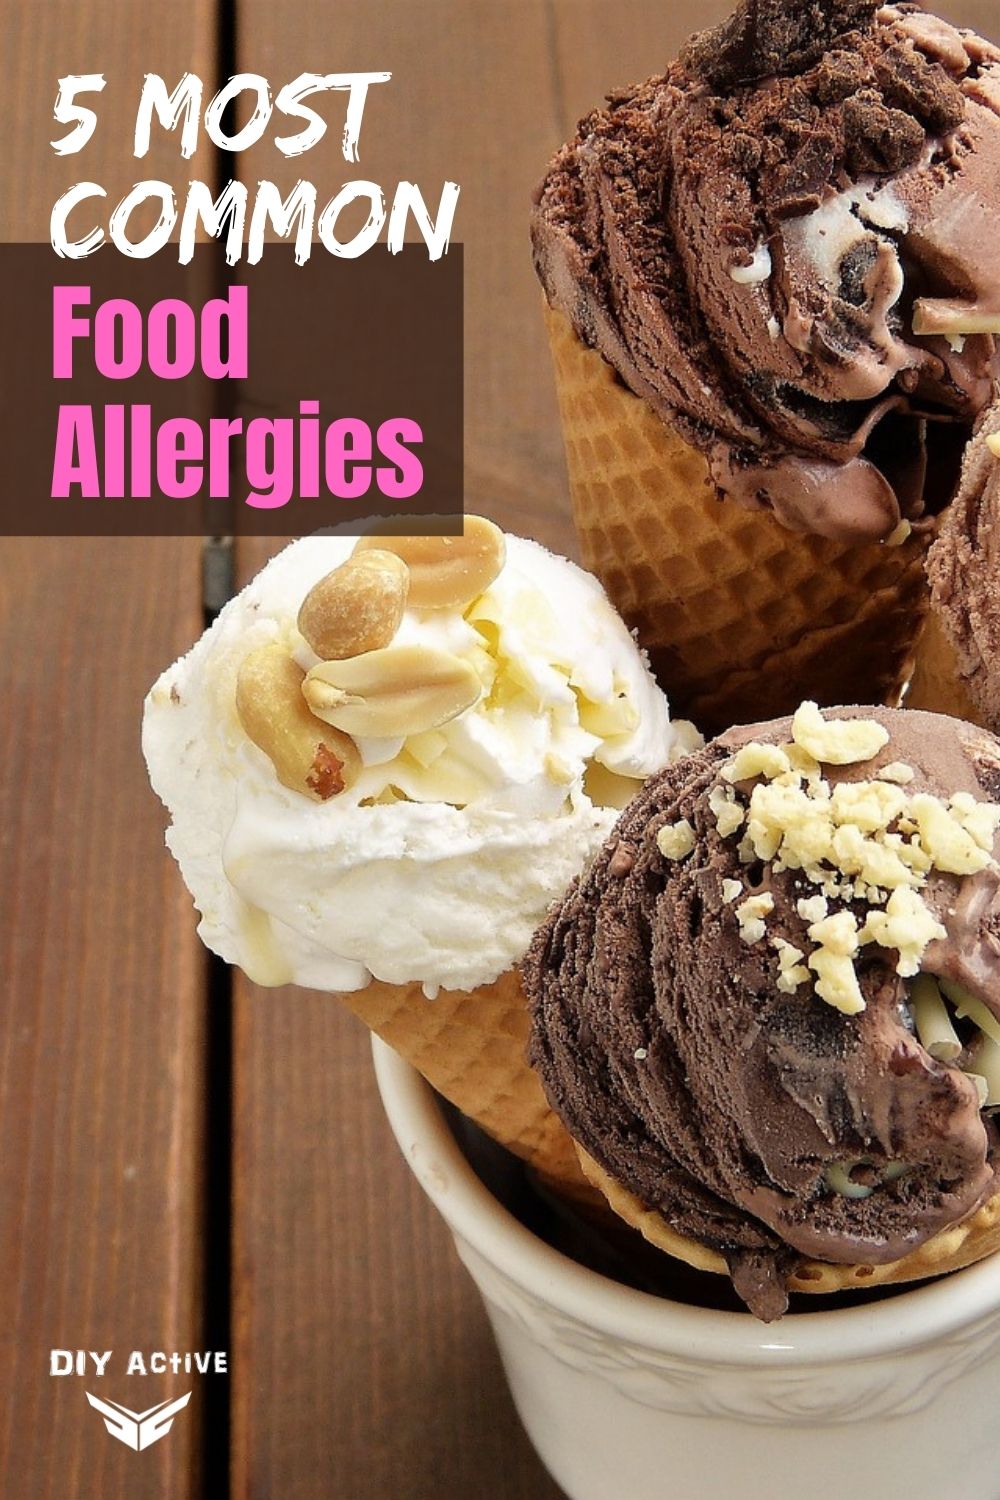 5 Most Common Food Allergies in the World